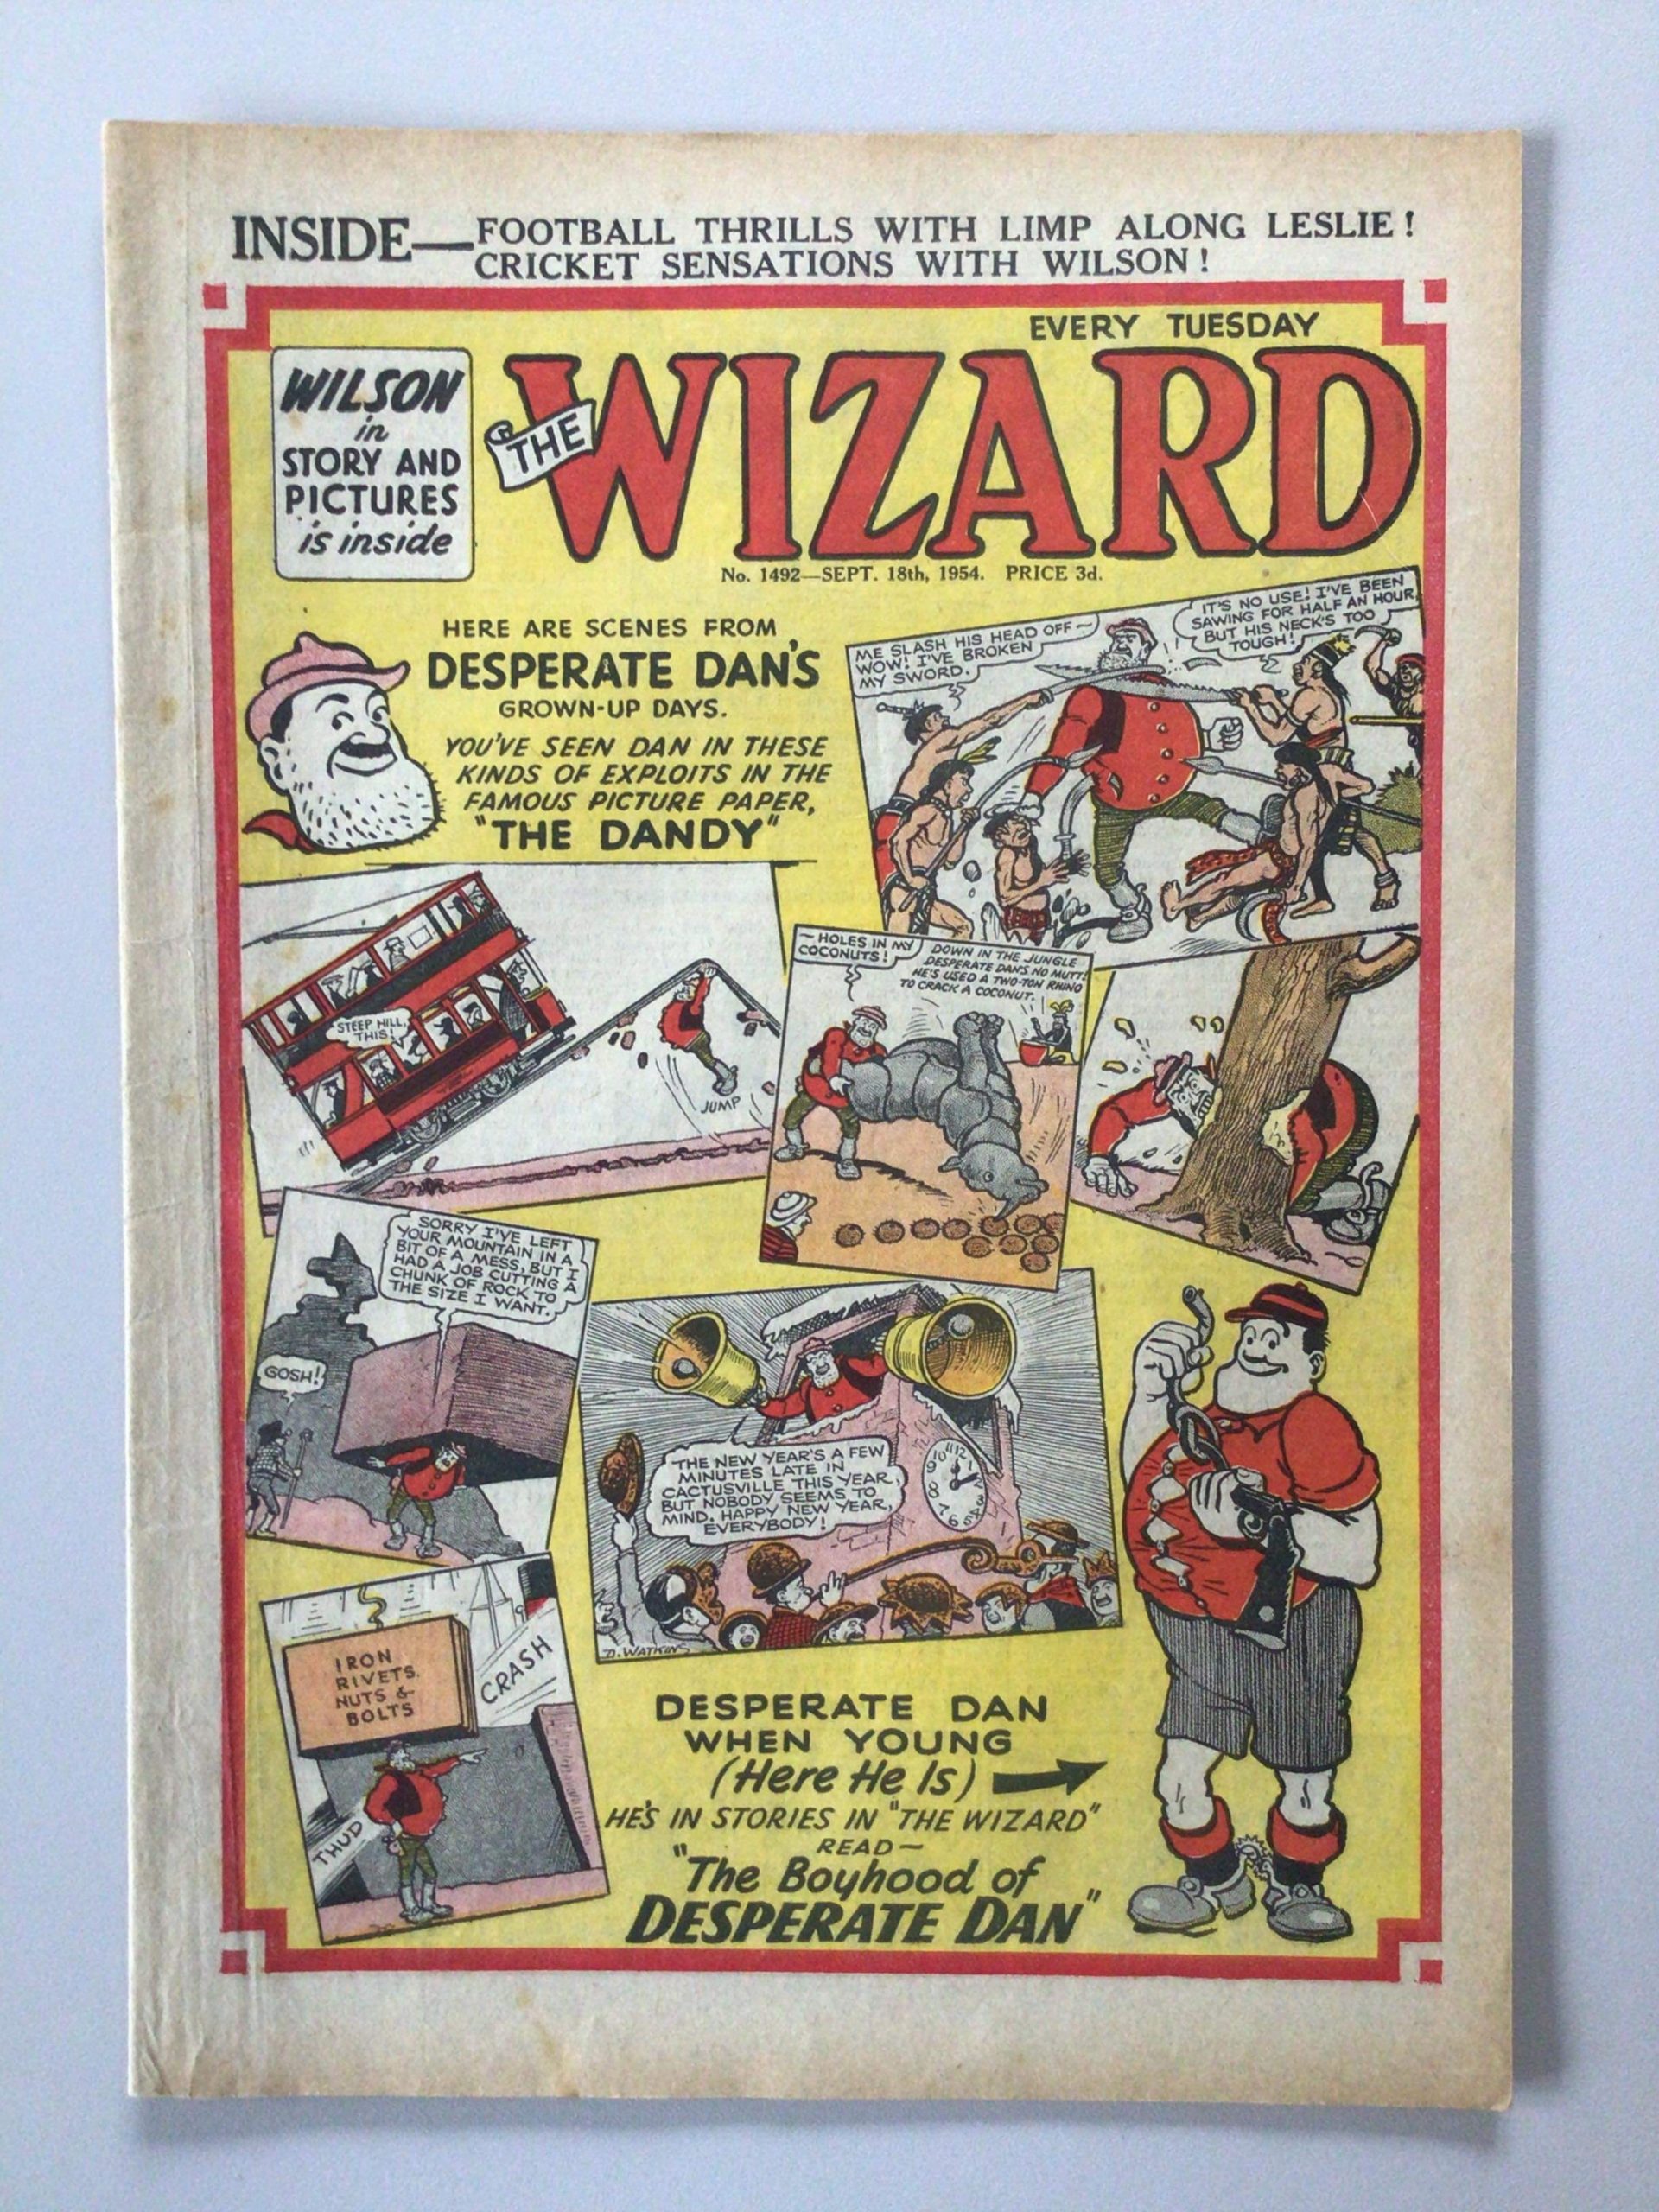 Wizard Comic No. 1492, cover dated 18th September 1954 - featuring desperate Dan on the cover